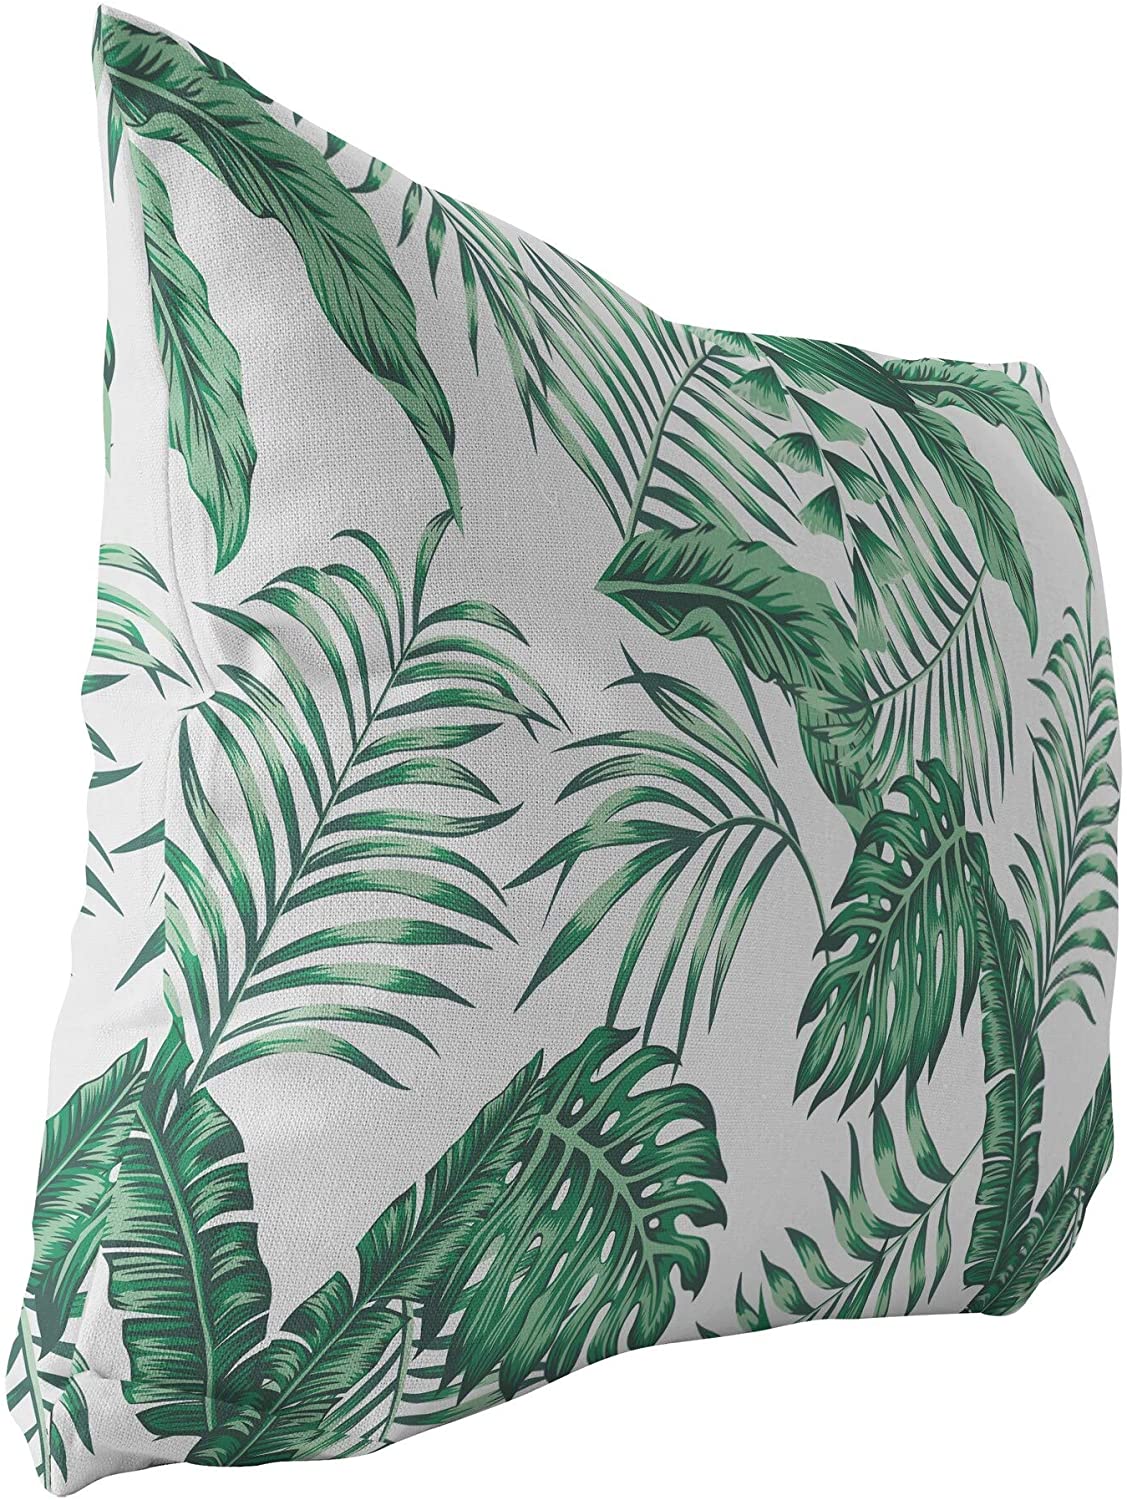 MISC Green Tropical Leaves Indoor|Outdoor Lumbar Pillow 20x14 Green Floral Tropical Polyester Removable Cover